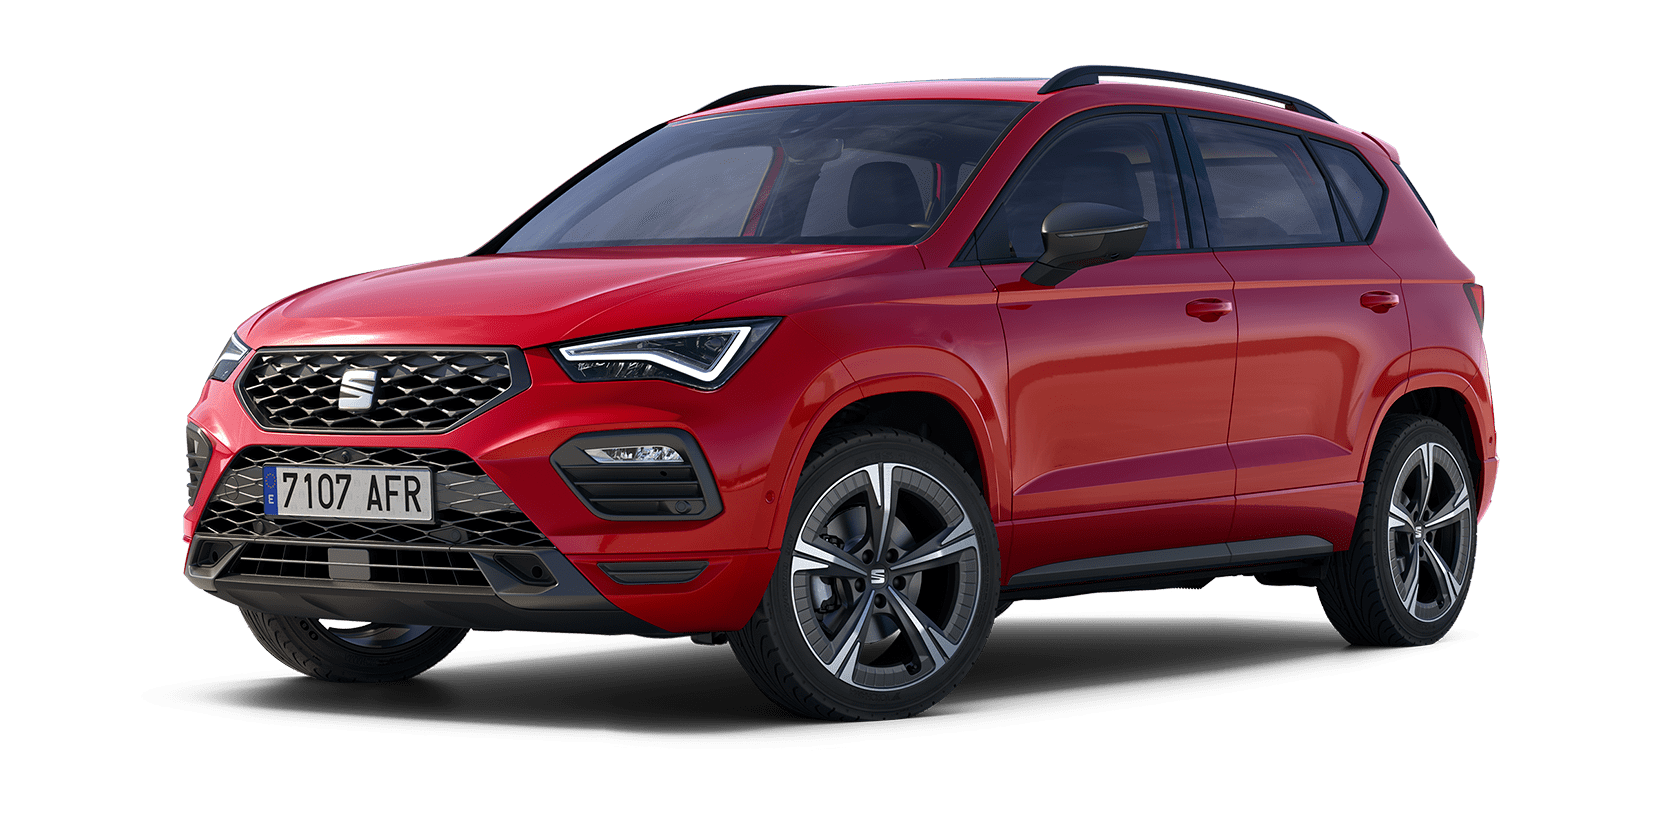 SEAT Ateca FR Sapphire Blue colour with performance machined alloy wheels